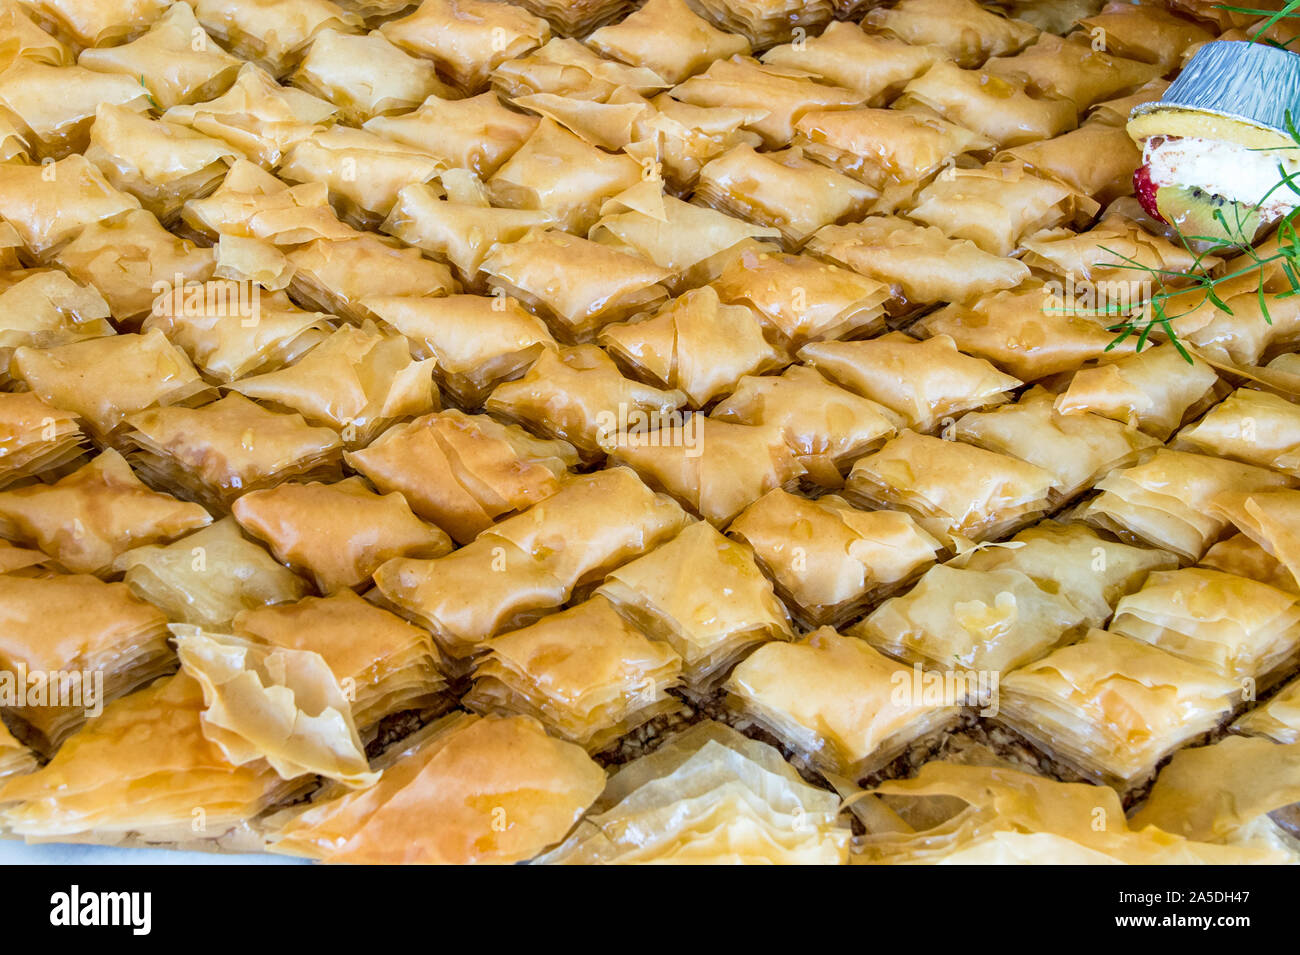 Honey soaked Baklava prepared with phyllo pastry, crunchy pistachio and drizzled with honey. Ready to be served and devoured Stock Photo